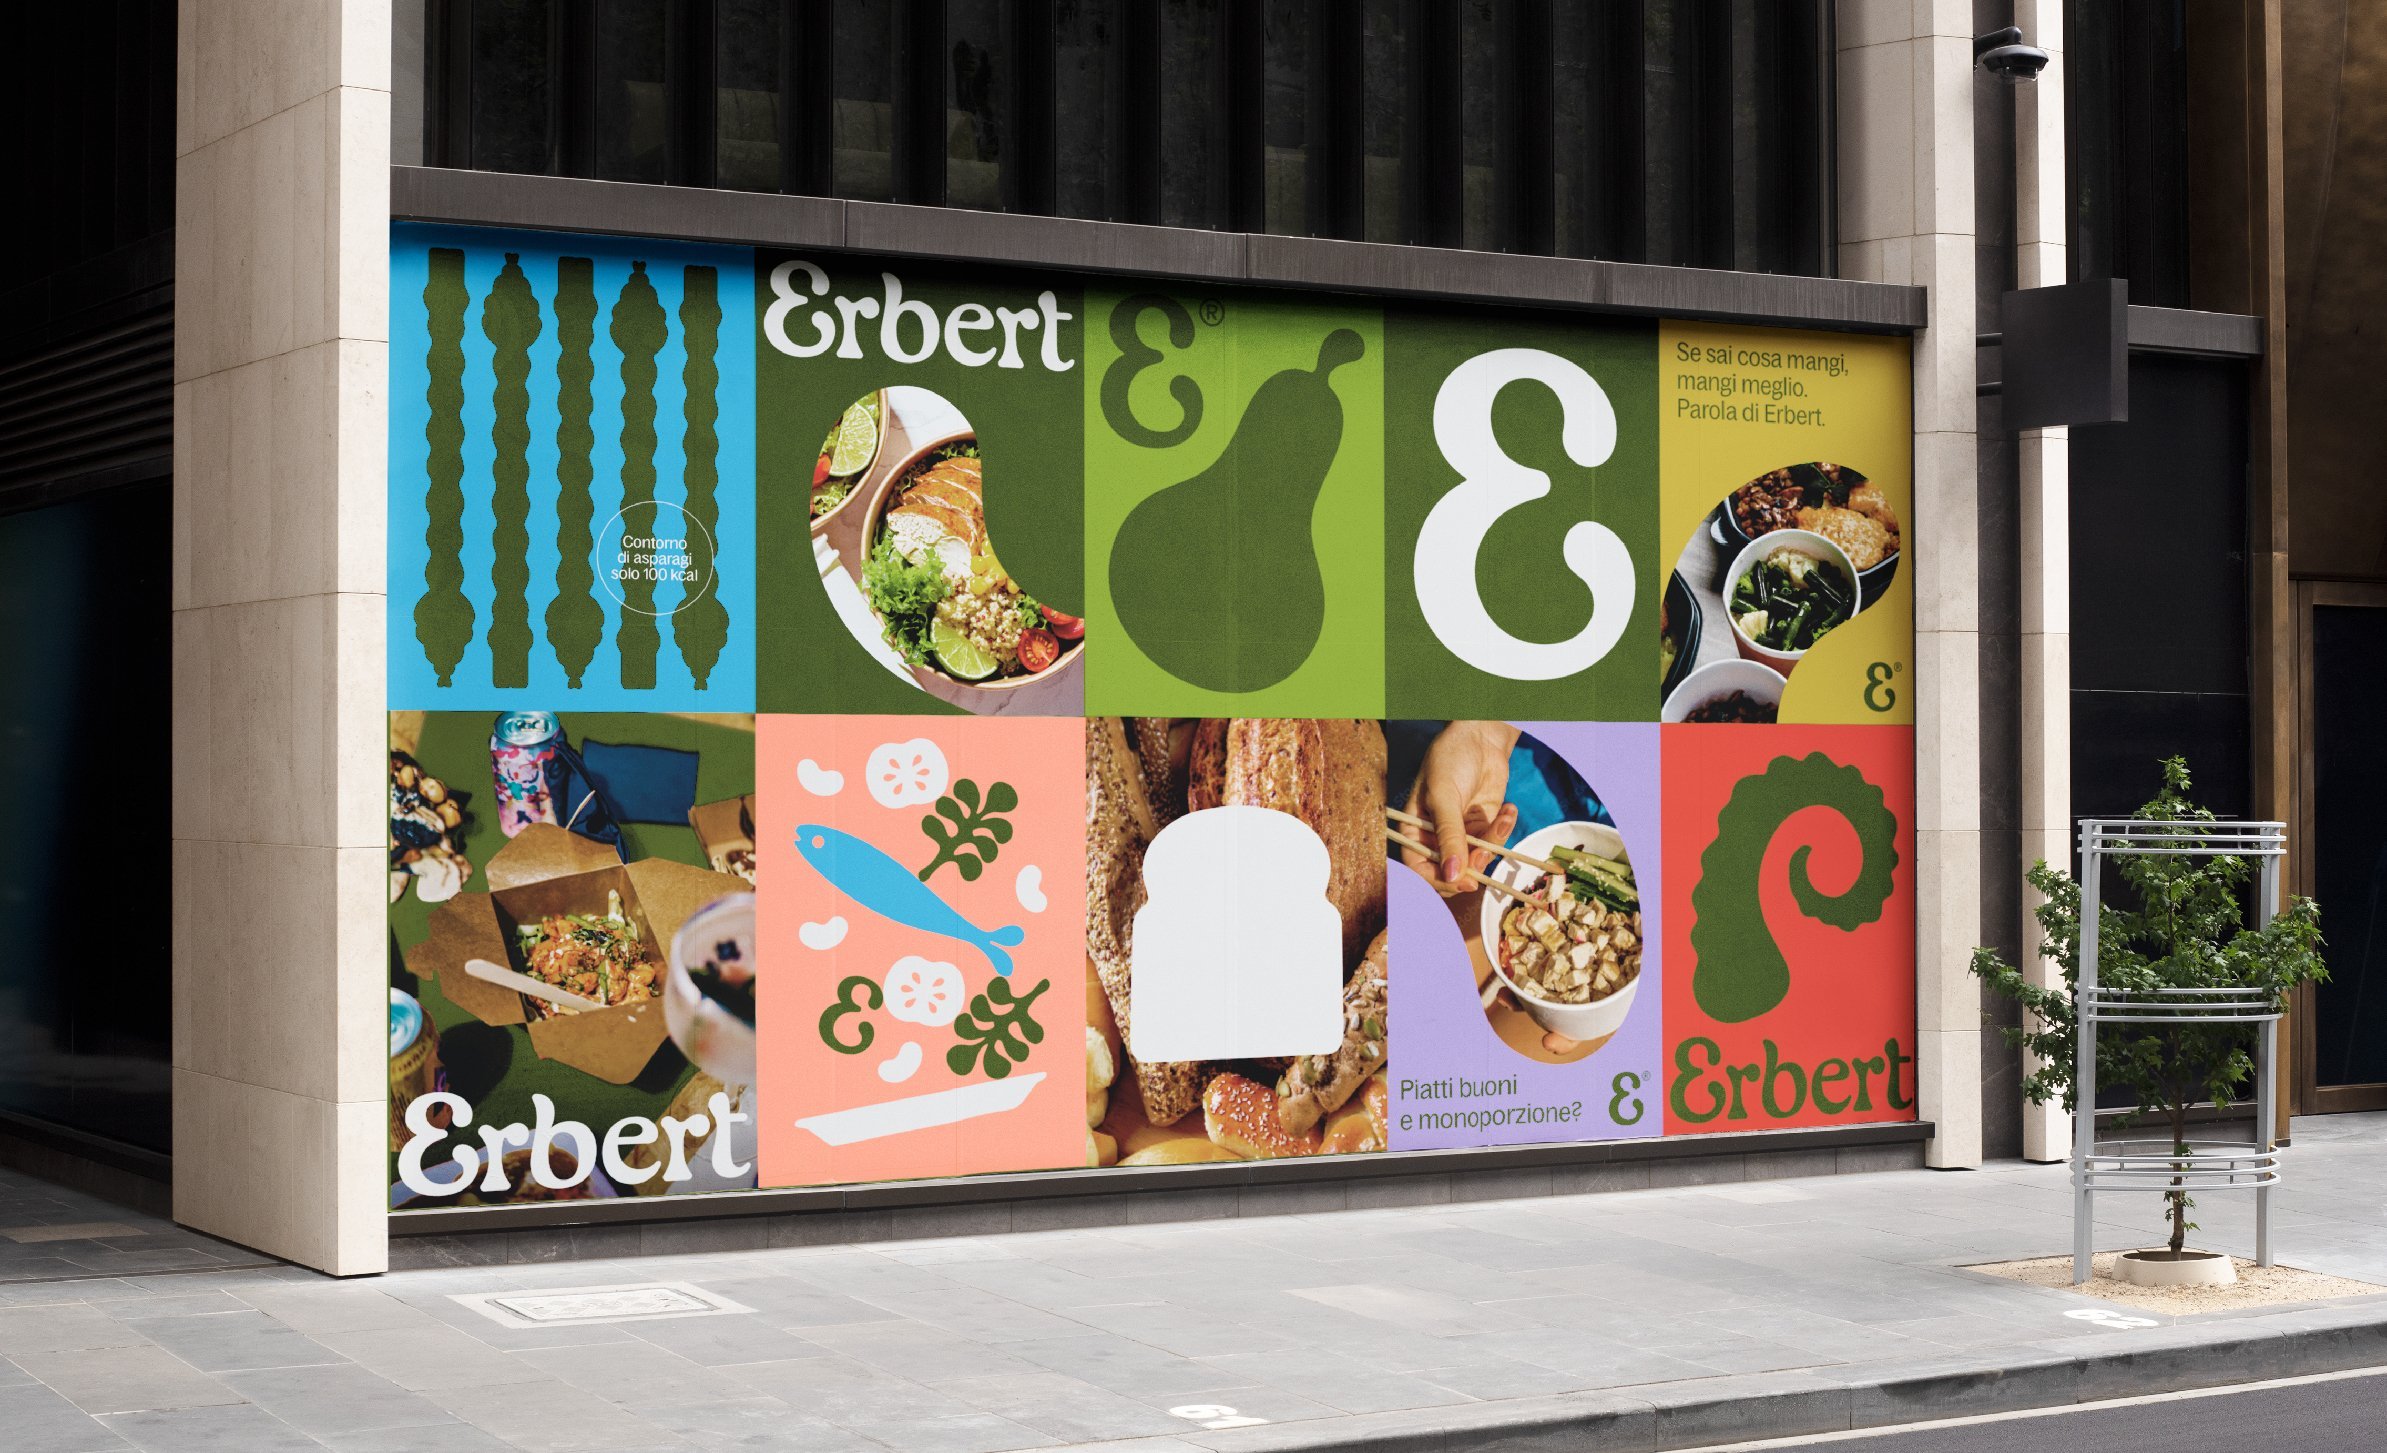 Logo and brand identity for Italian healthy fast-food chain Erbert designed by Florence-based design studio AUGE.